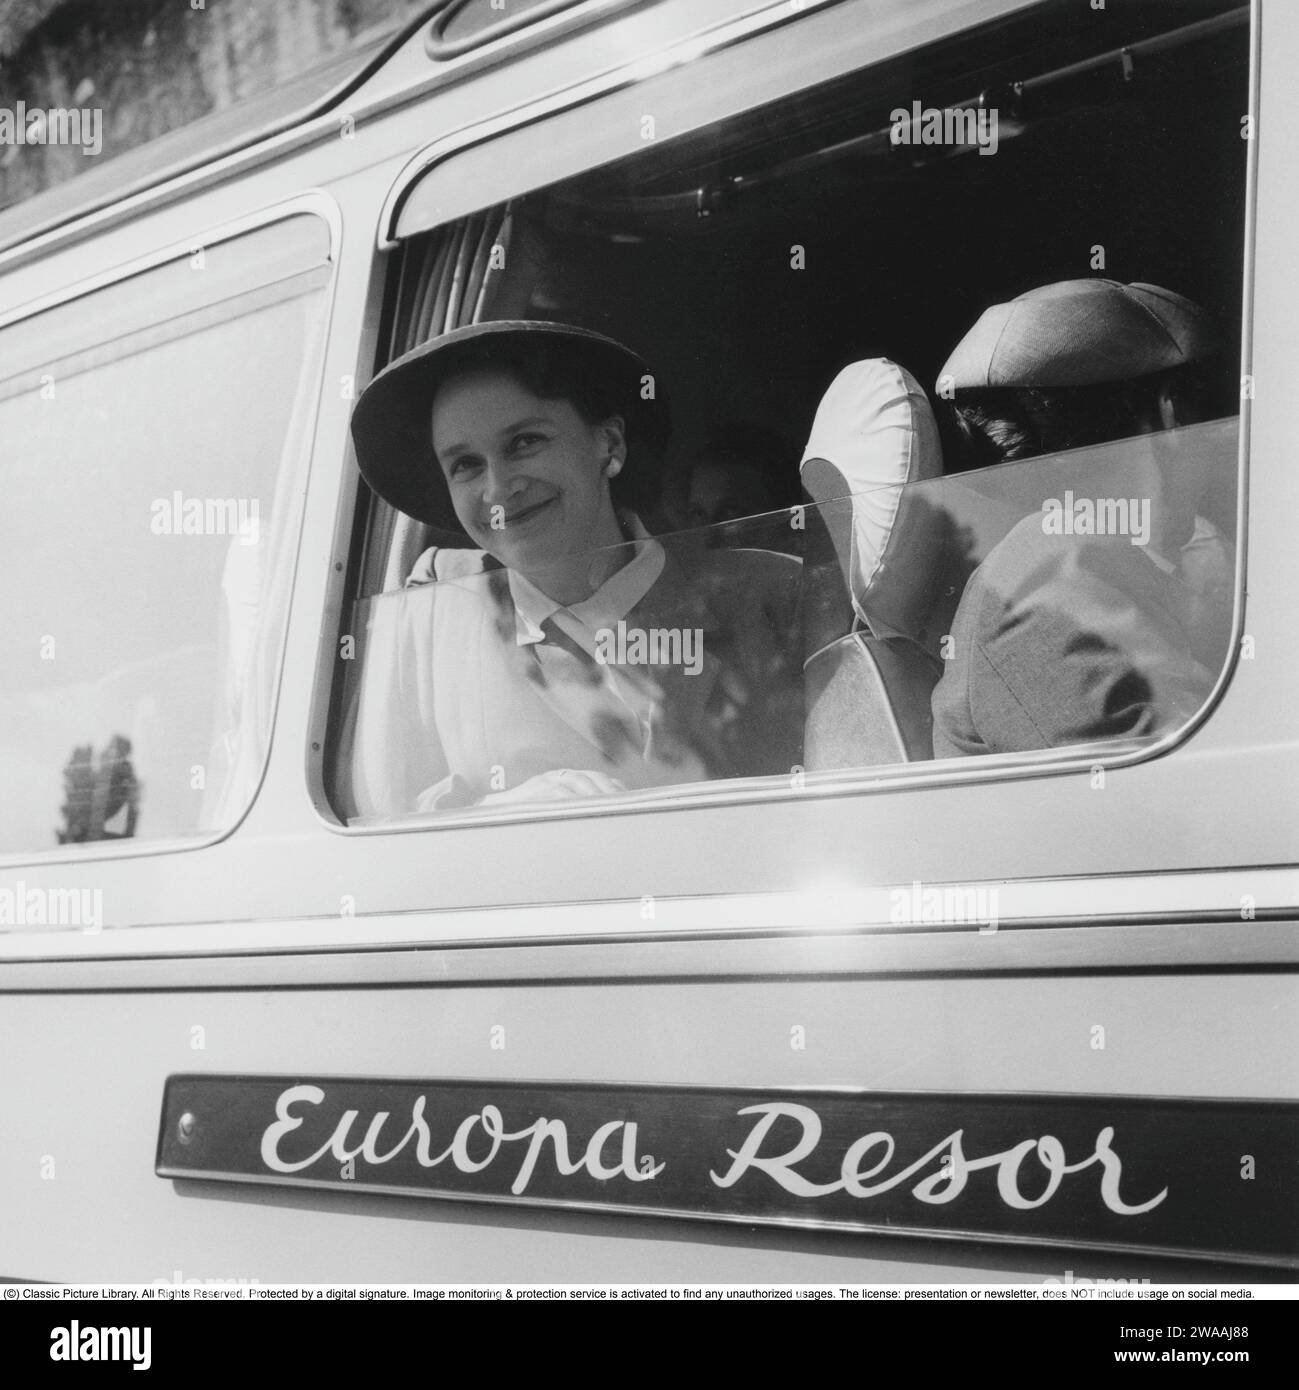 Holiday in the 1940s. A bus from the company Europa resor is ready for departure. The trip goes to Europe and a woman has rolled down the window and looks out. It takes four days to Paris from Sweden and excursions are arranged along the way. The bus charter was popular and affordable and after World War II there were many companies that bused travelers to Europe. 1948. Conard ref 665 Stock Photo